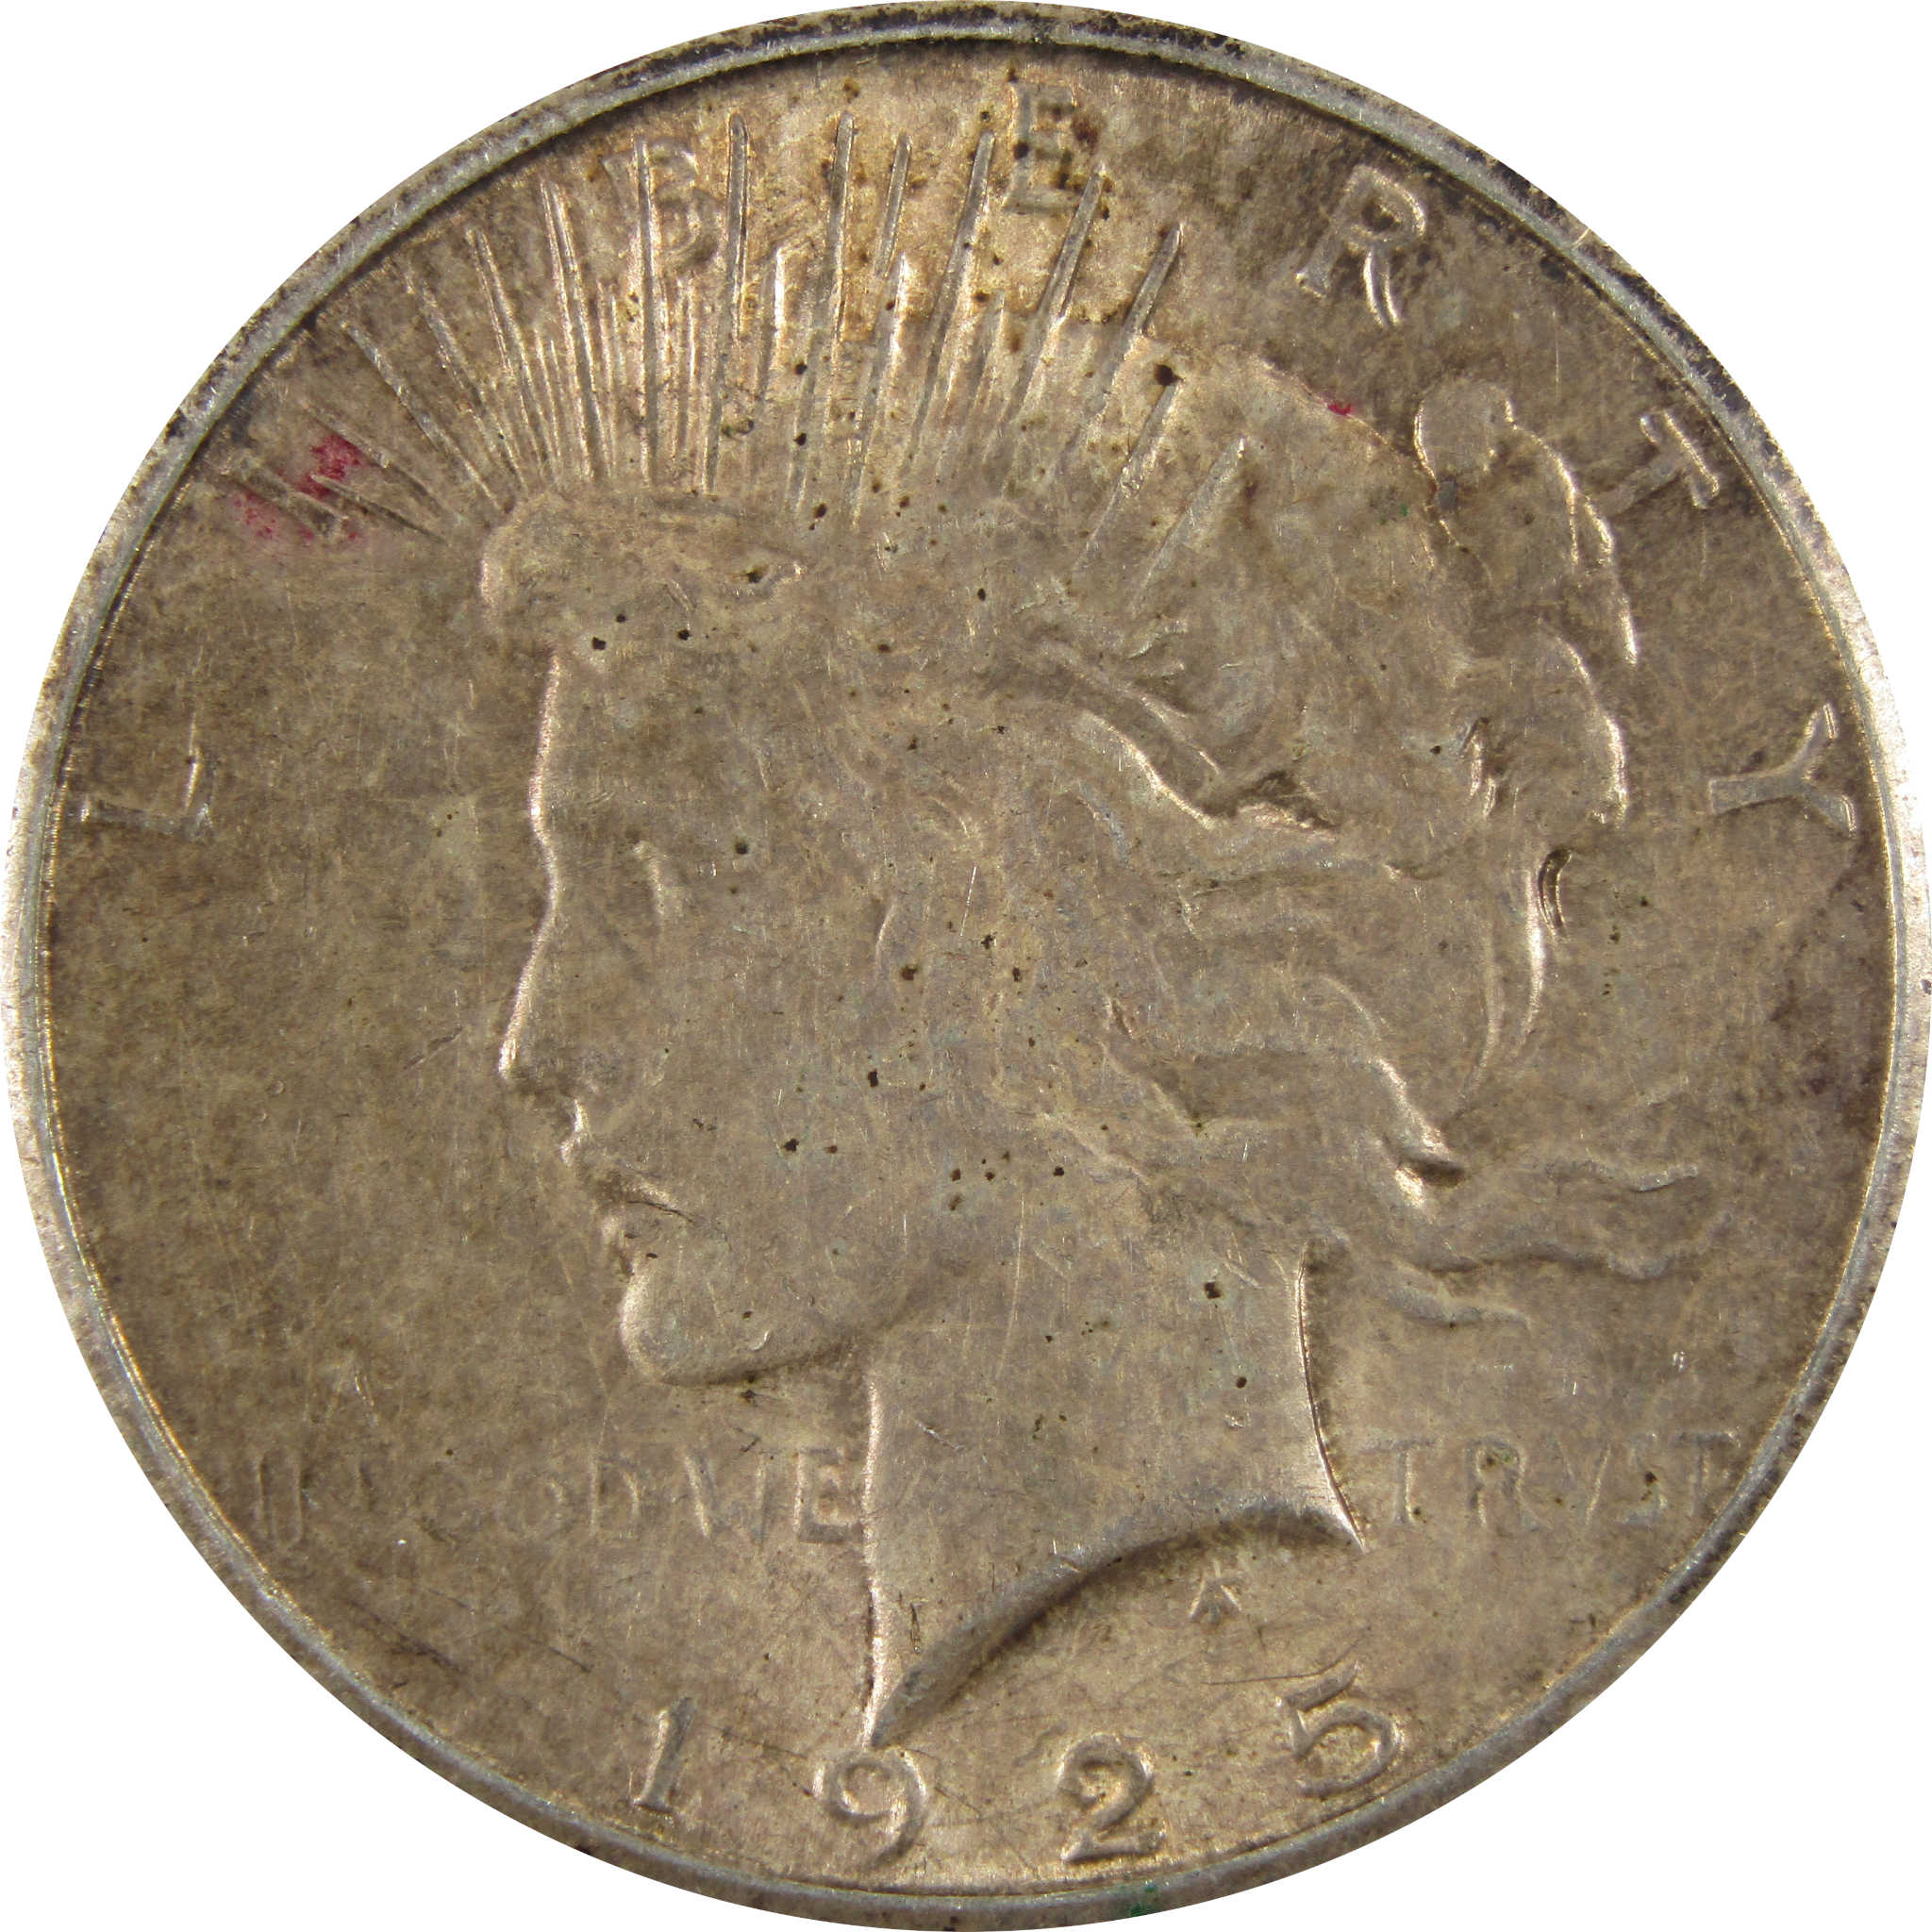 1925 S Peace Dollar AU About Uncirculated 90% Silver $1 Coin SKU:I7727